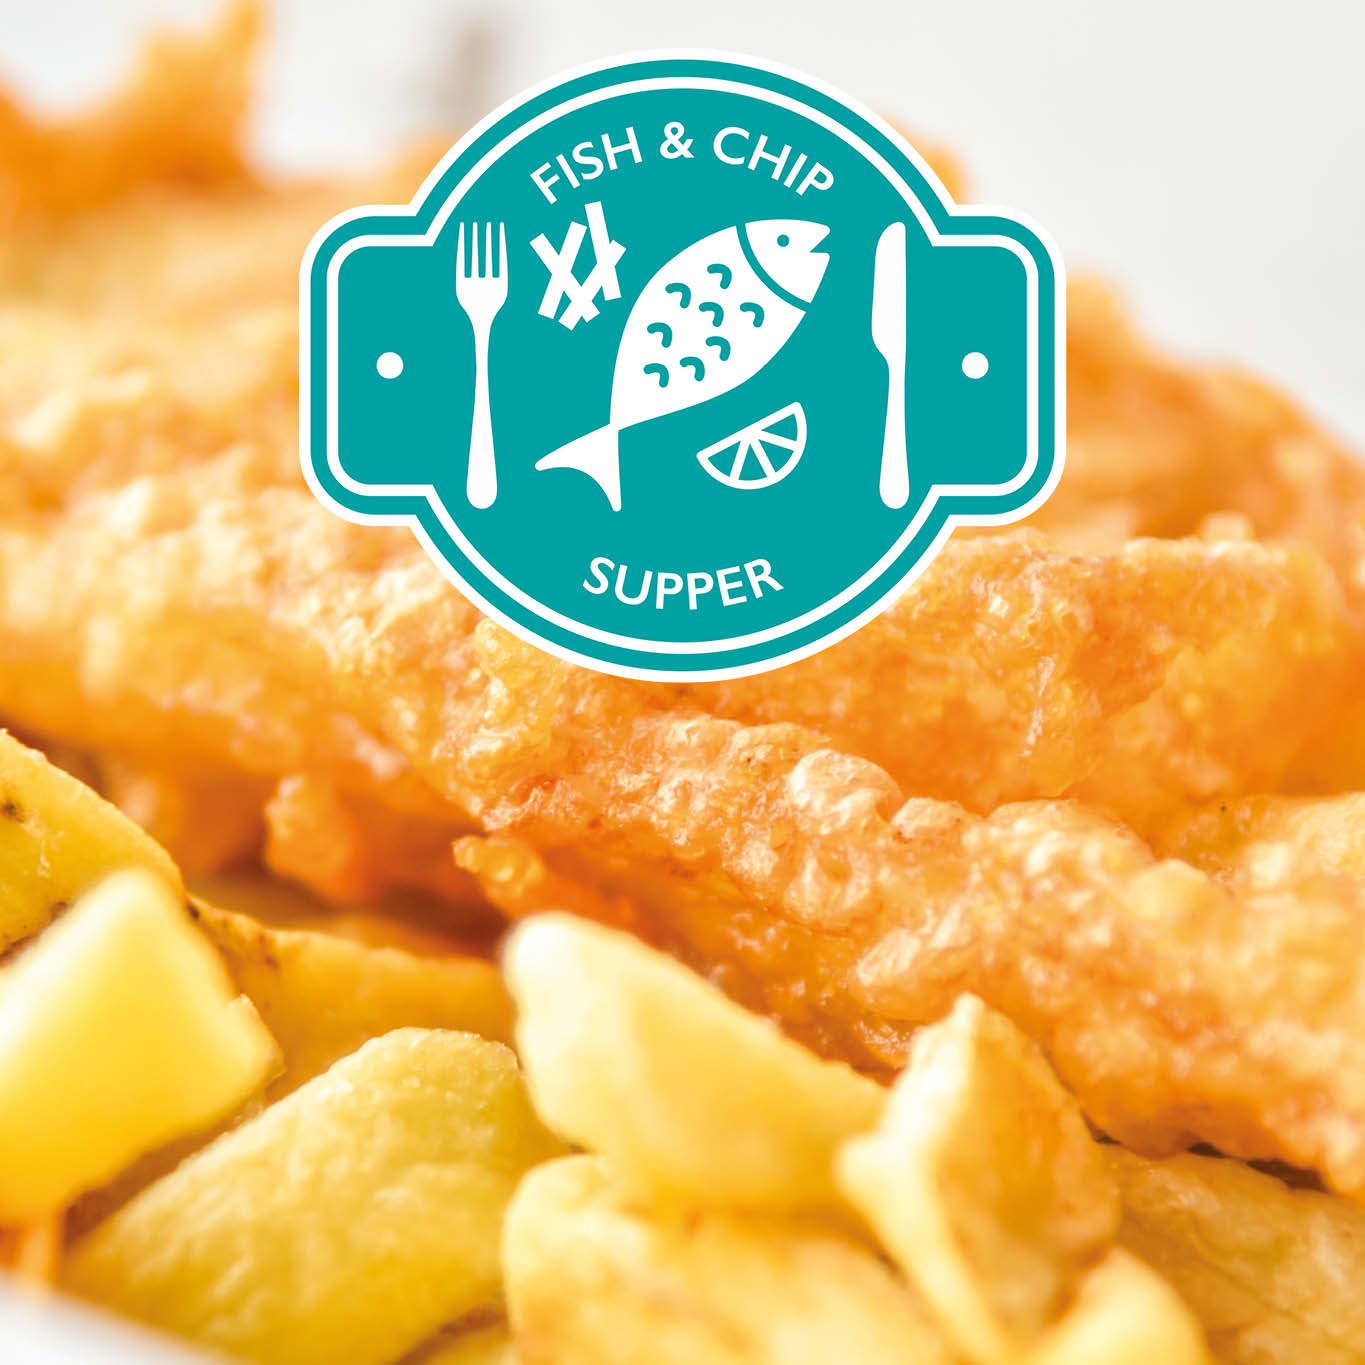 Fish & Chip Supper